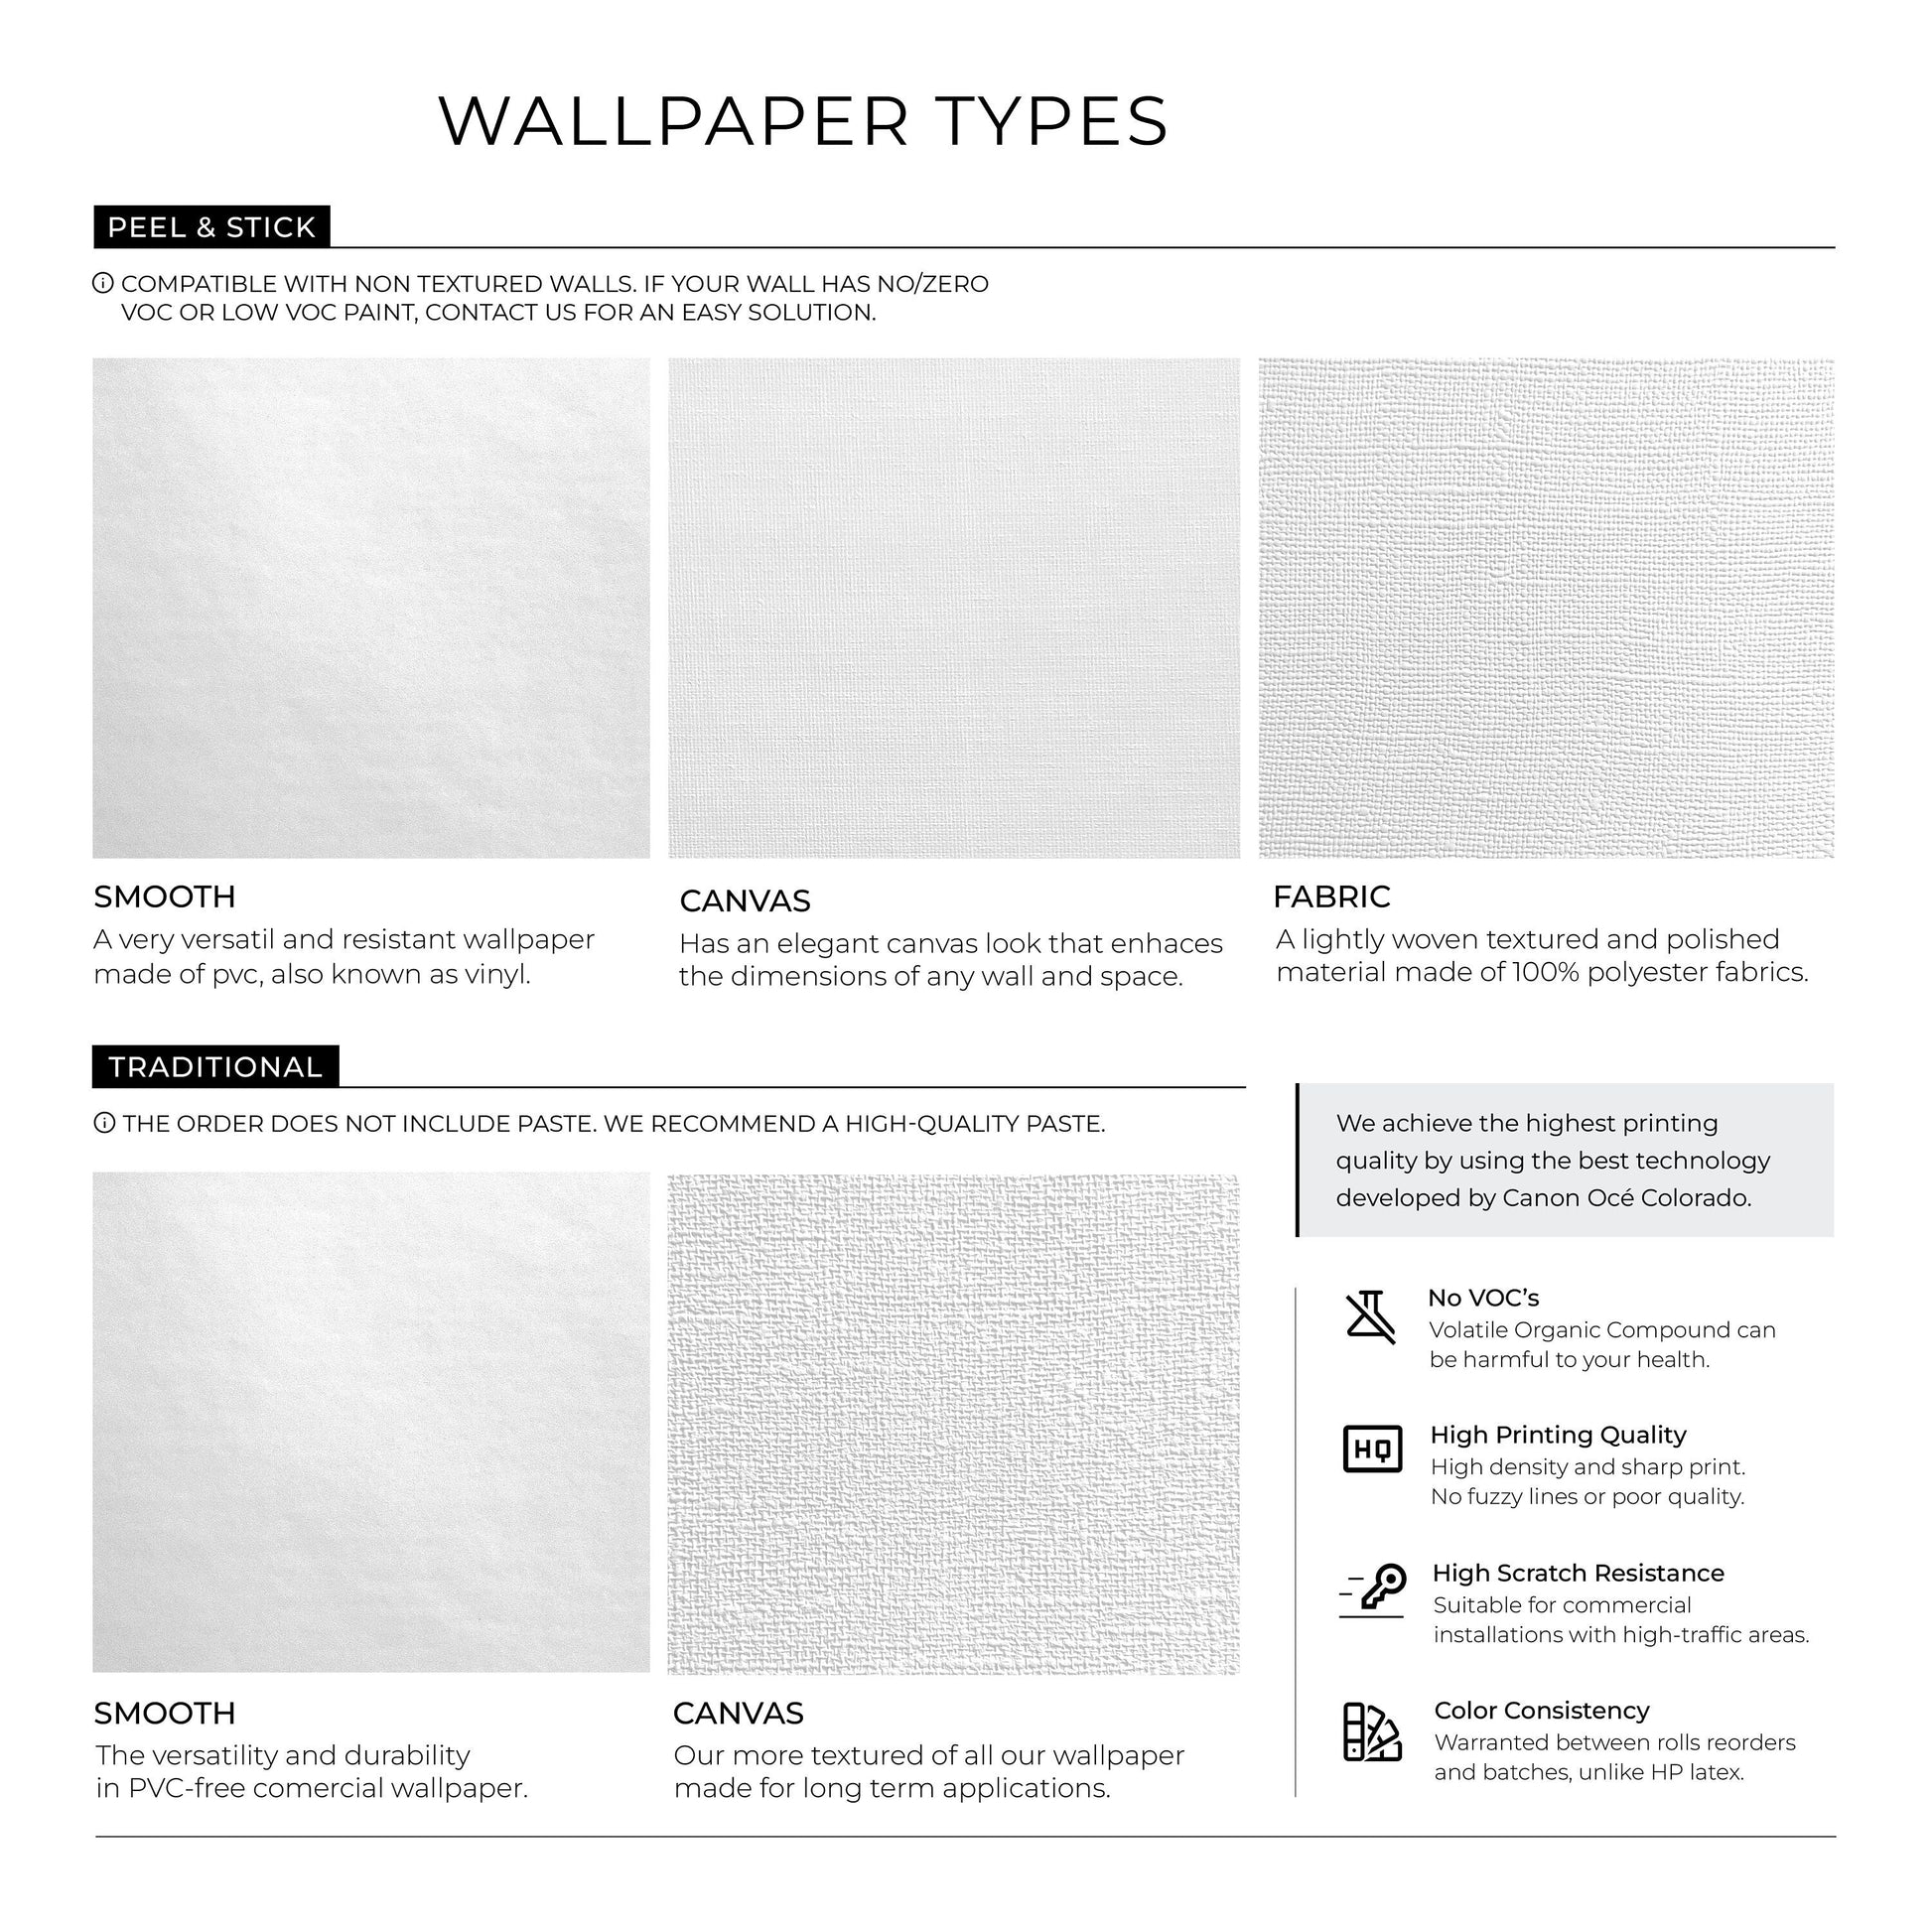 Removable Wallpaper, Boho Wall, Peel and Stick Wallpaper, Removable Wallpaper, Wall Paper Removable, Wallpaper - A944